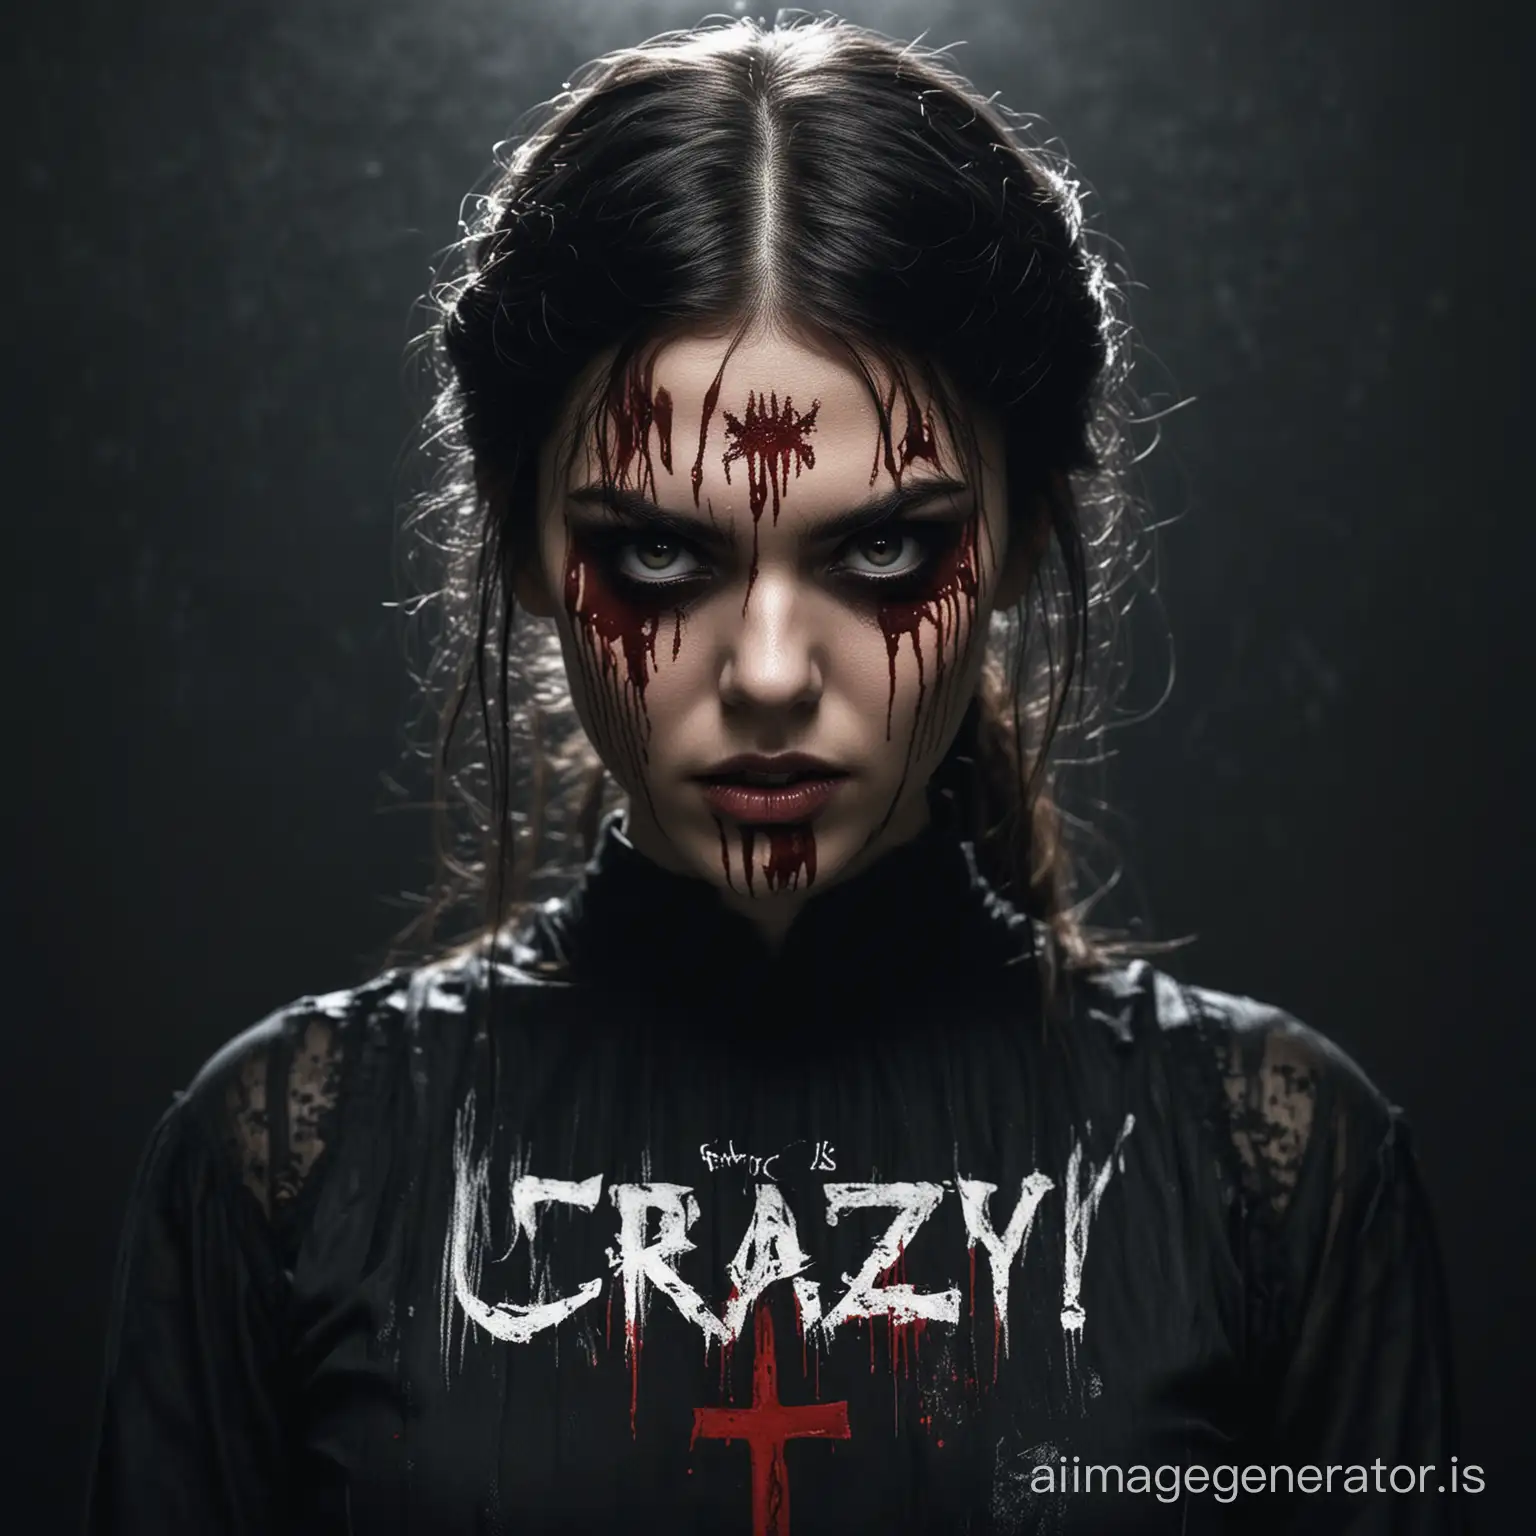 Creepy-DarkHaired-Girl-with-Evil-Logo-BloodStained-Face-and-Crazy-Expression-in-Dark-Dress